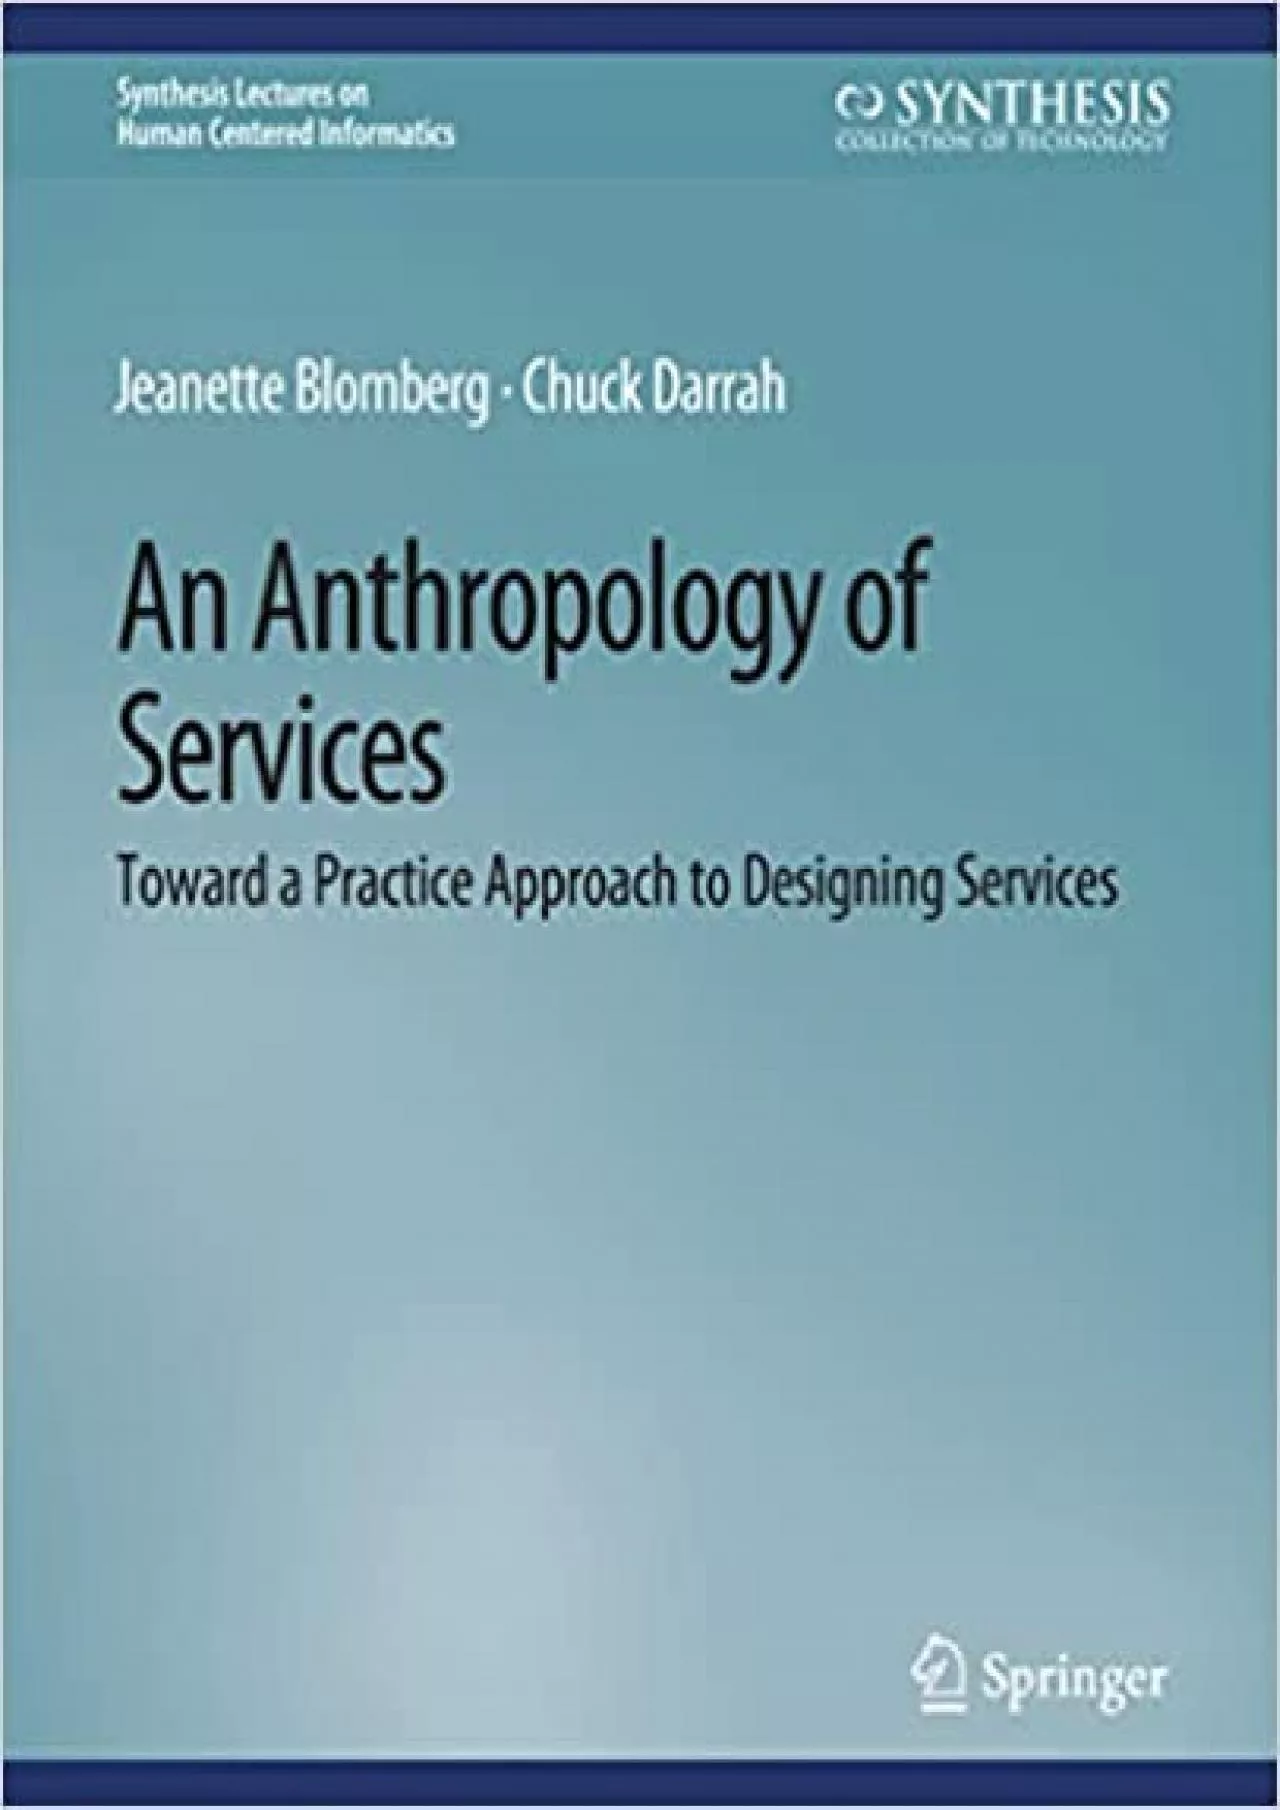 (READ)-An Anthropology of Services Toward a Practice Approach to Designing Services (Synthesis